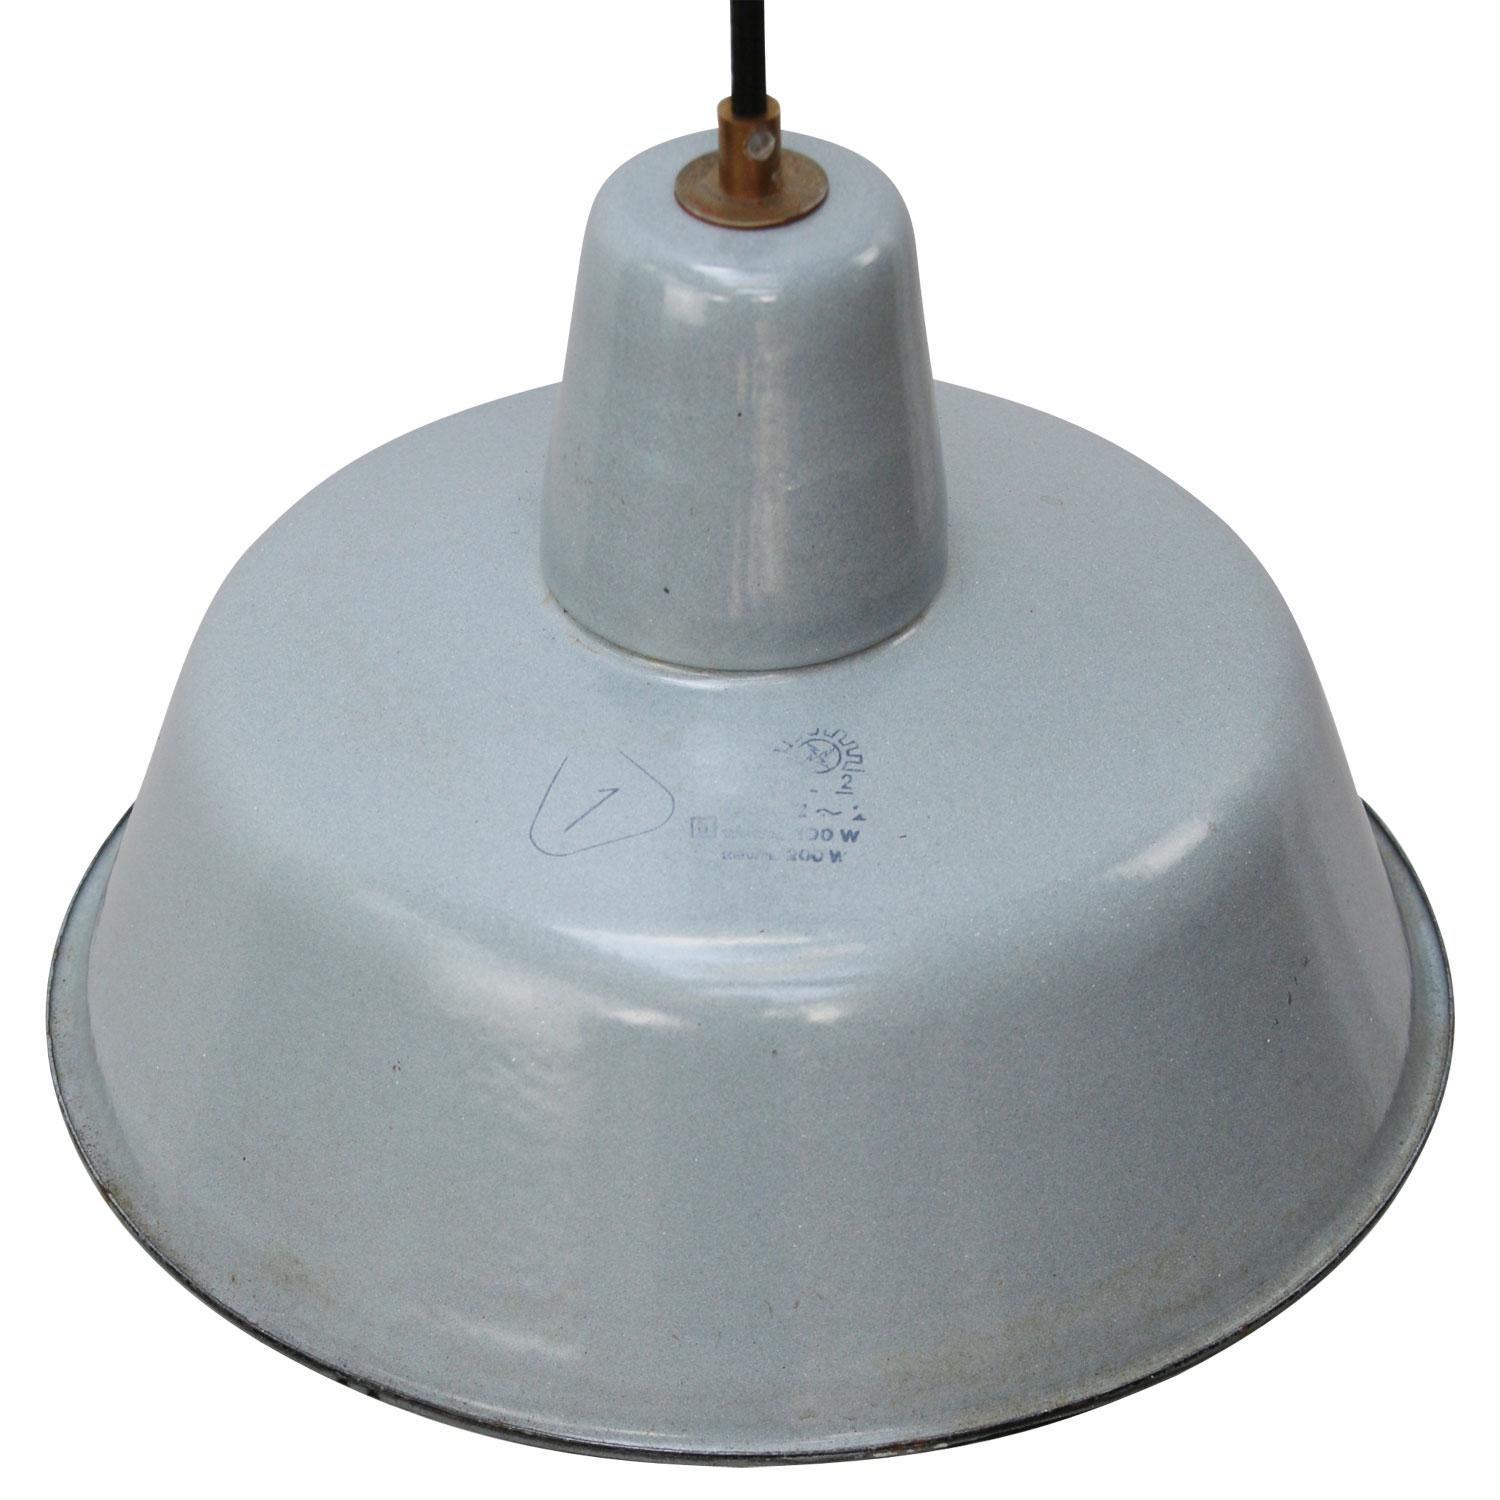 Vintage Industrial pendant. Gray enamel with white interior.

Weight: 1.3 kg / 2.9 lb

Priced per individual item. All lamps have been made suitable by international standards for incandescent light bulbs, energy-efficient and LED bulbs. E26/E27